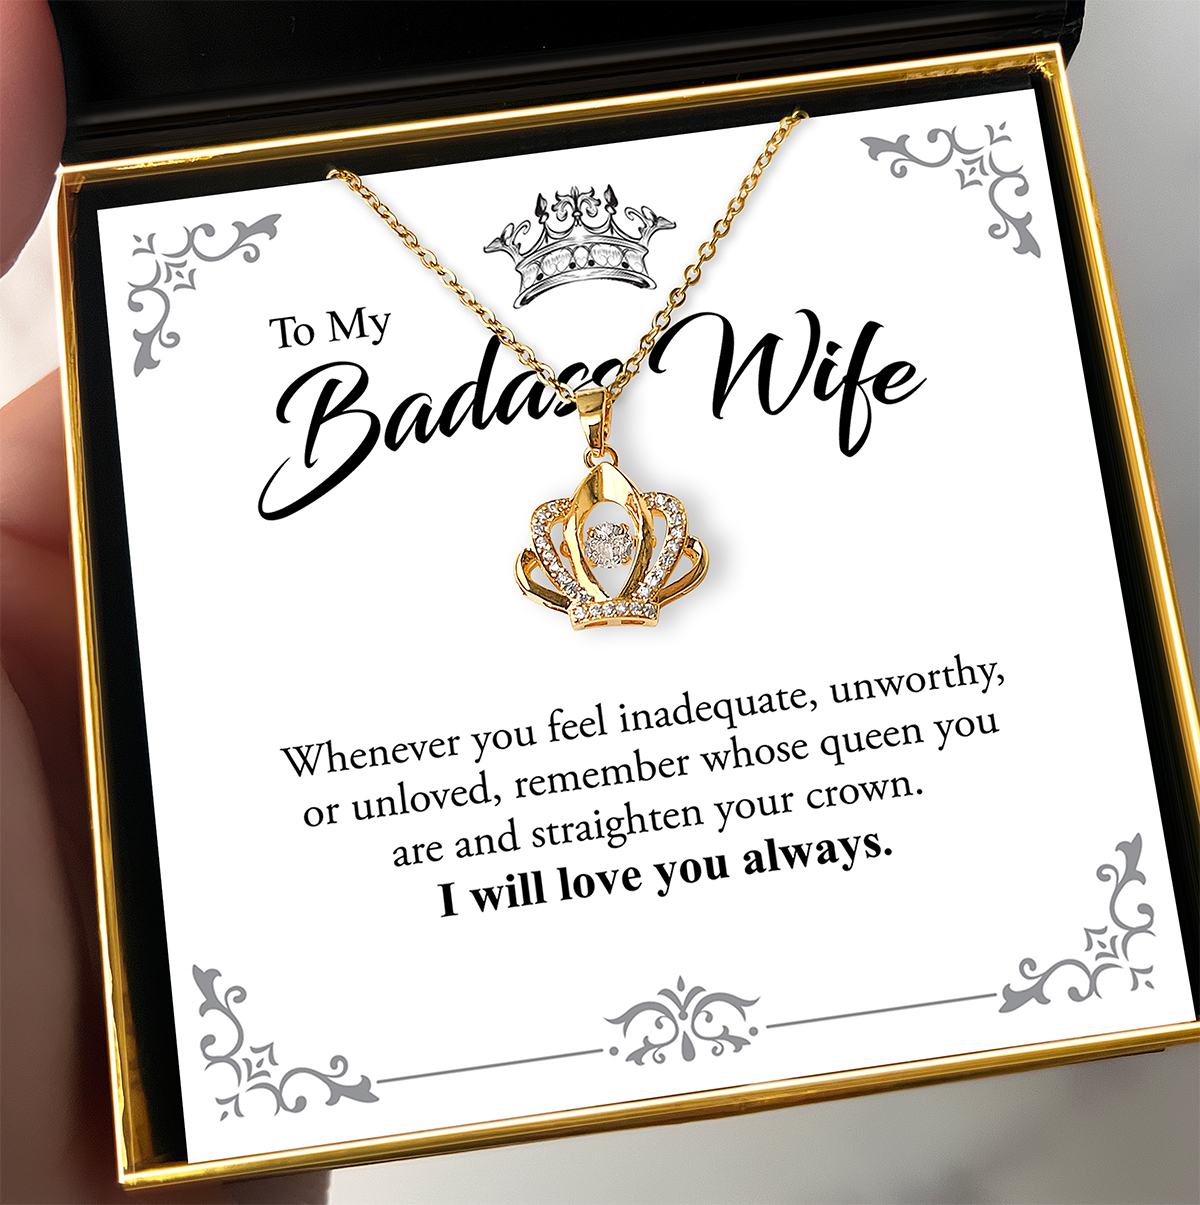 To My Badass Wife - Dancing Crystal Gold Crown Necklace Gift Set